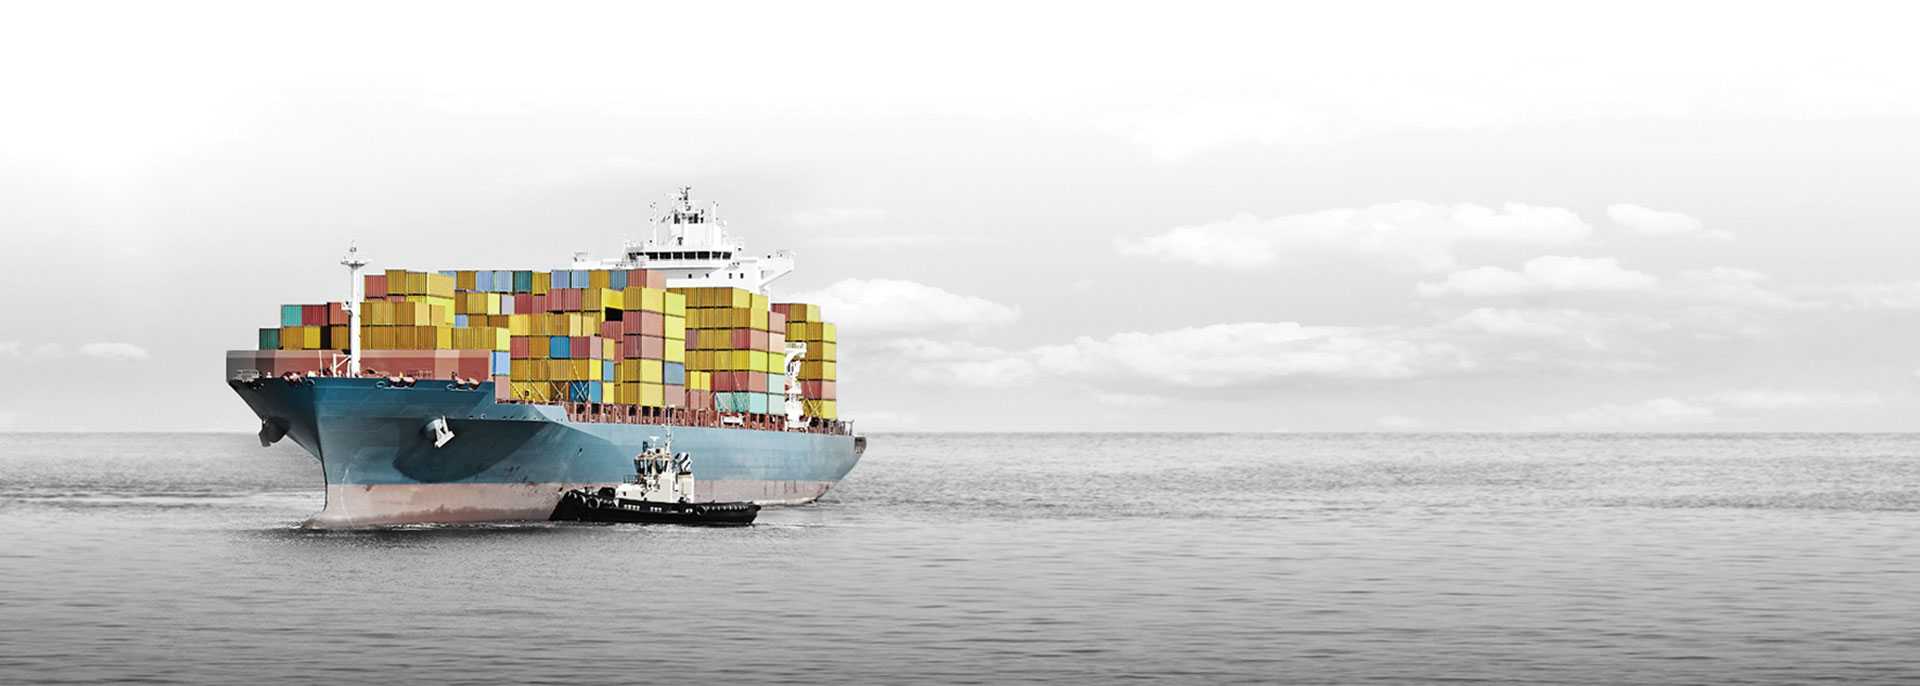 Large shipping boat on the open ocean, the boat and shipping containers are in color and the rest in black and white